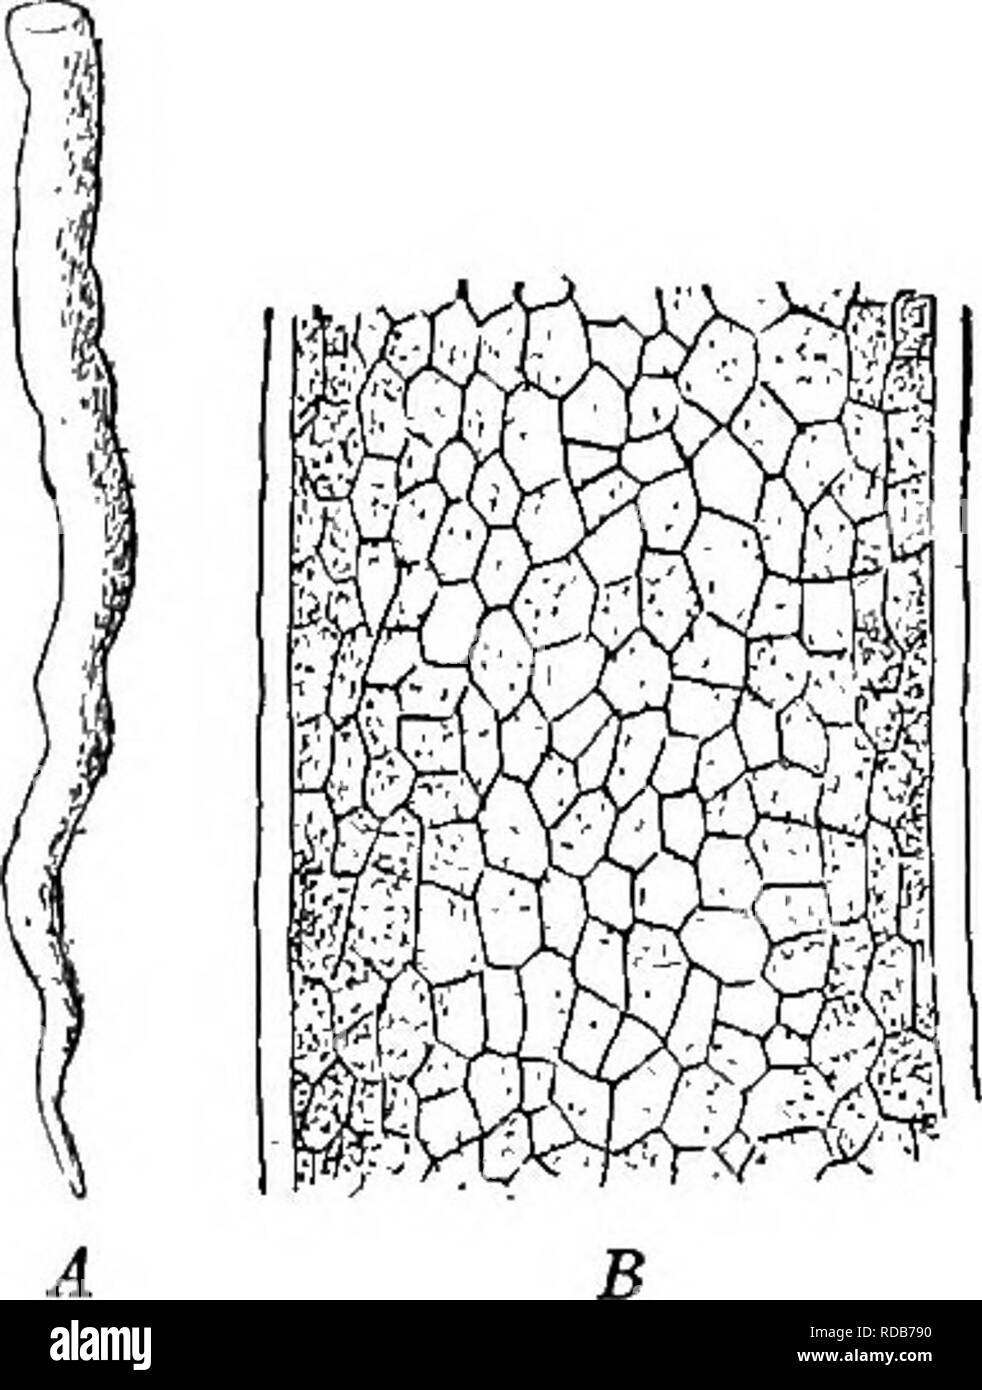 . Fresh-water biology. Freshwater biology. THE FRESH-WATER ALGAE l6l 192 (193) Plant cylindrical, flattened, or branched, of a sinniple layer of cells, reproduction by zoospores and isogametes. Enteromorpha Link. Frequently branched and variable in shape; chromatophore parietal, with one pyrenoid. Zoospores with four ciha and a pigment spot. Gametes with two cilia. Both zoospores and gametes are formed in the vegetative cells except those at the base. The greater number  of species of Enieromorpha. are marine, though E. inkslinalis is found in the fresh water. Many of the salt-water forms are  Stock Photo